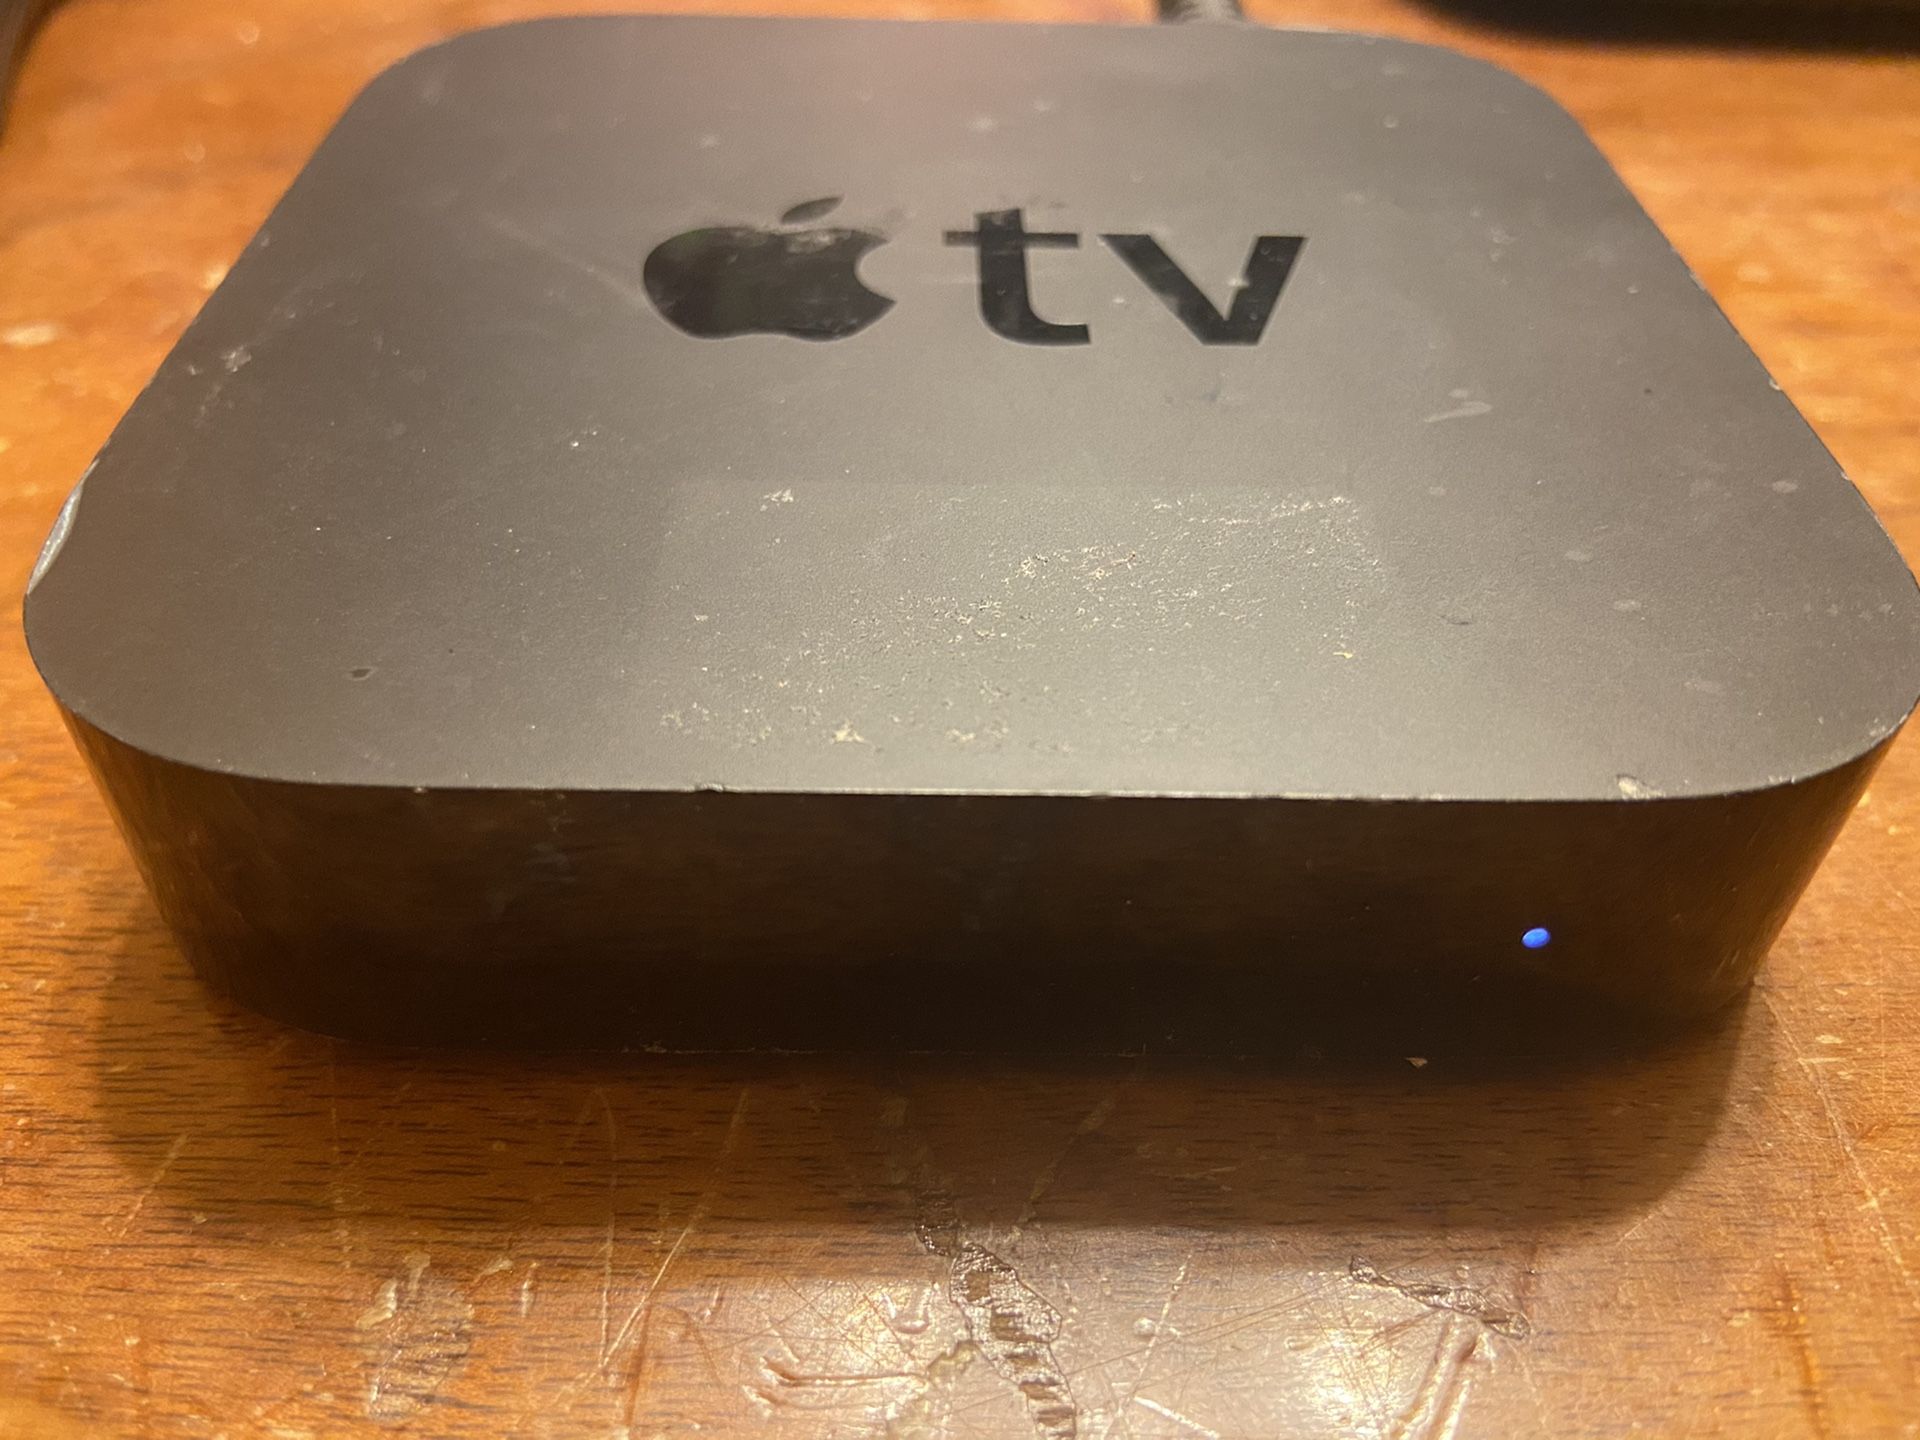 Apple A1469 EMC2633 Apple TV 3rd generation No remote With power cord